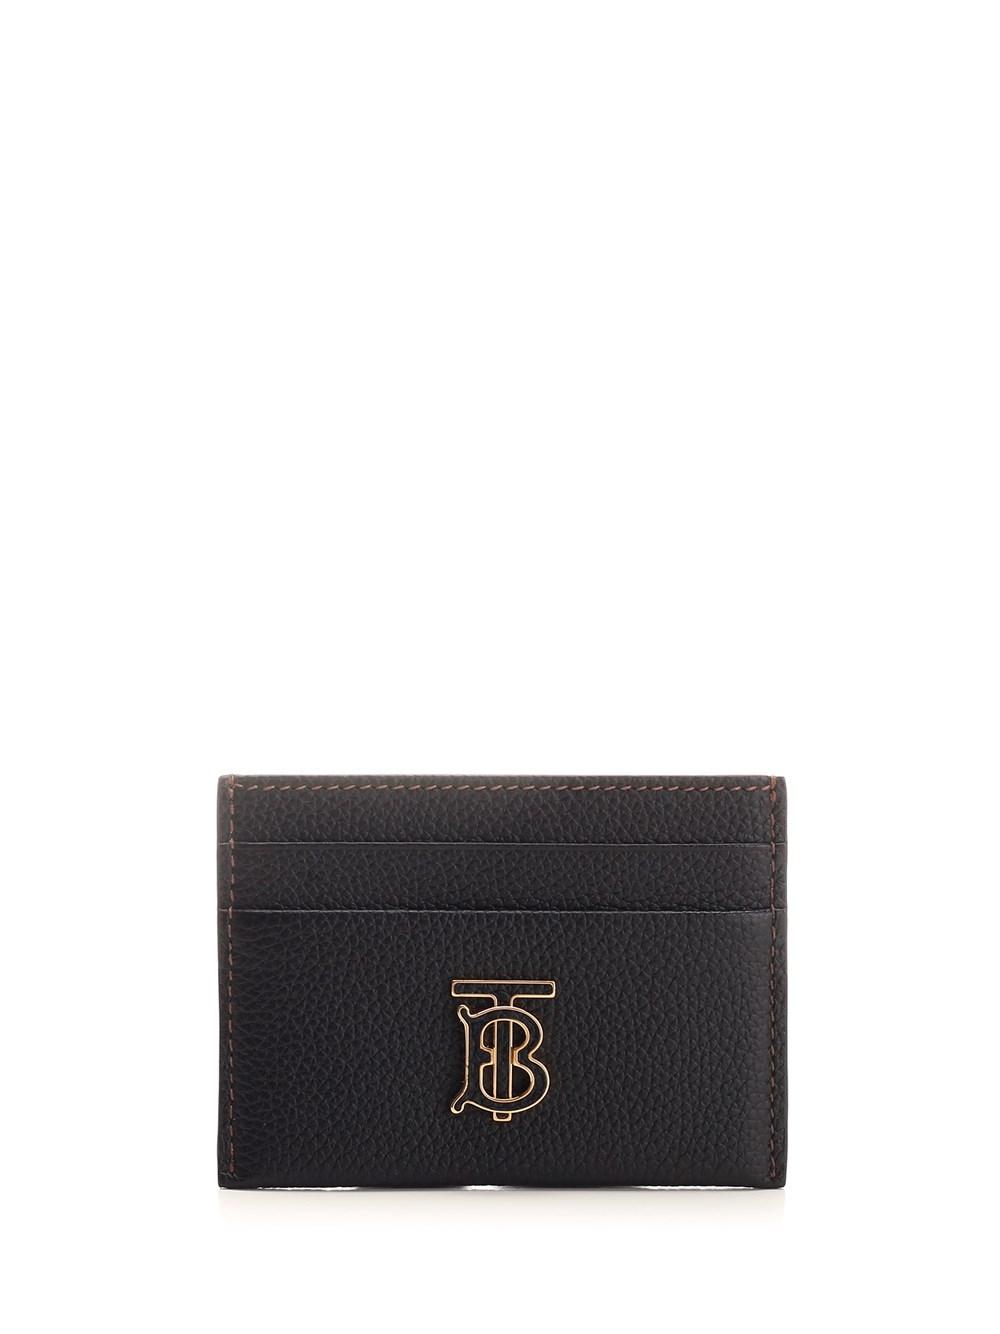 Burberry Card Holder in Black | Lyst